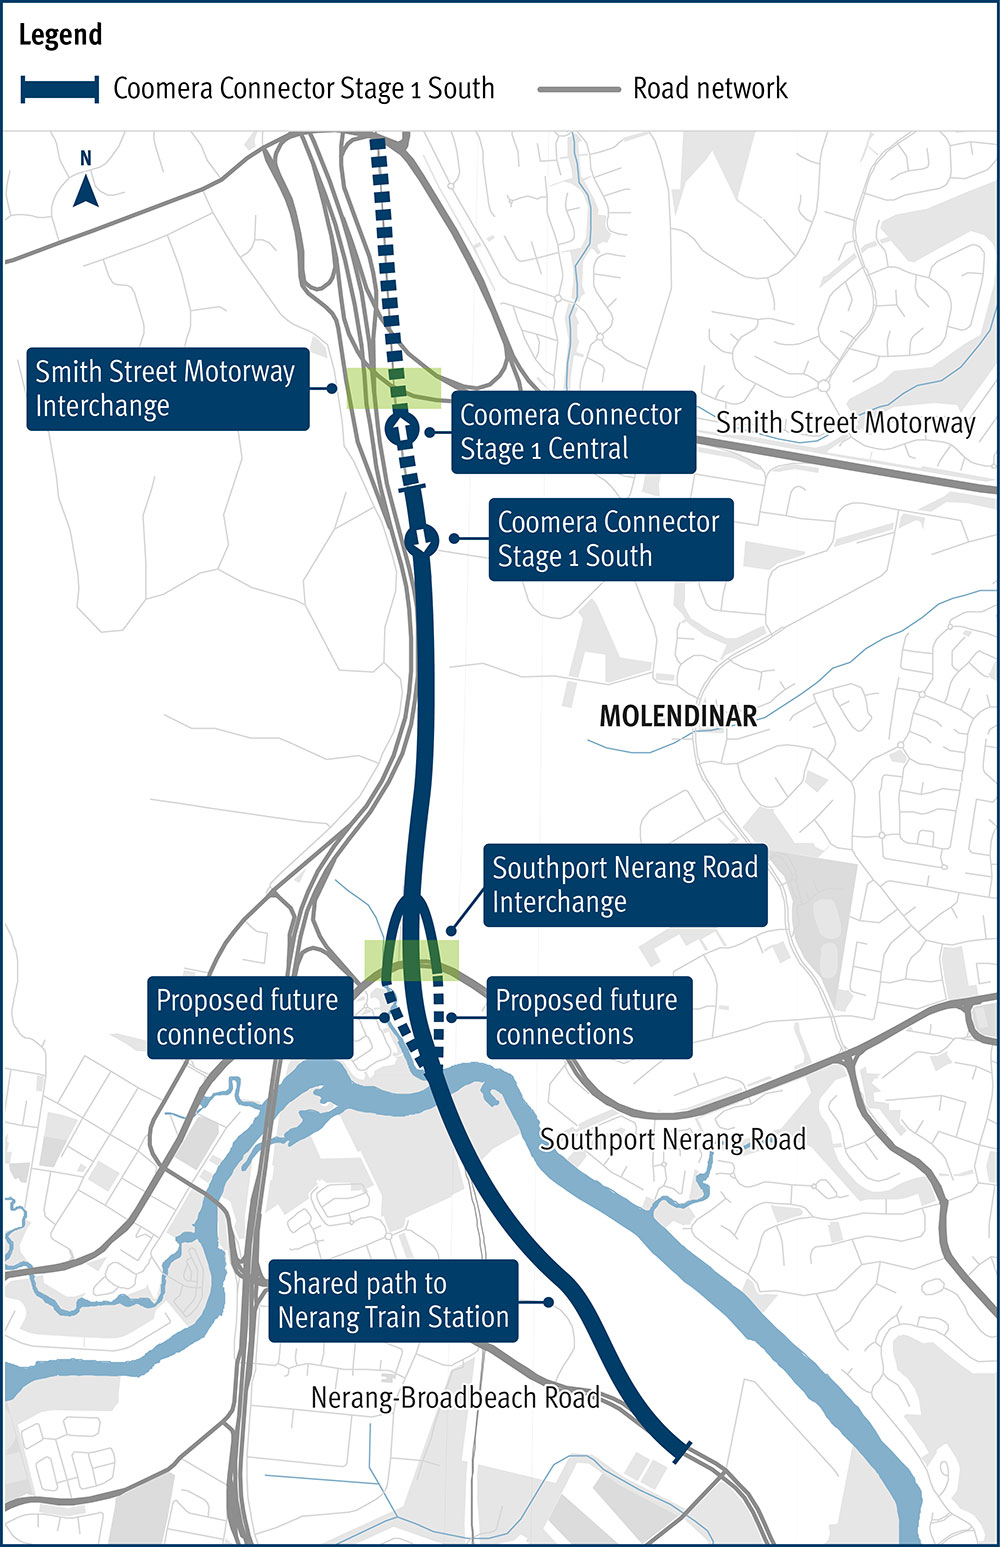 Coomera Connector Stage 1 South project map